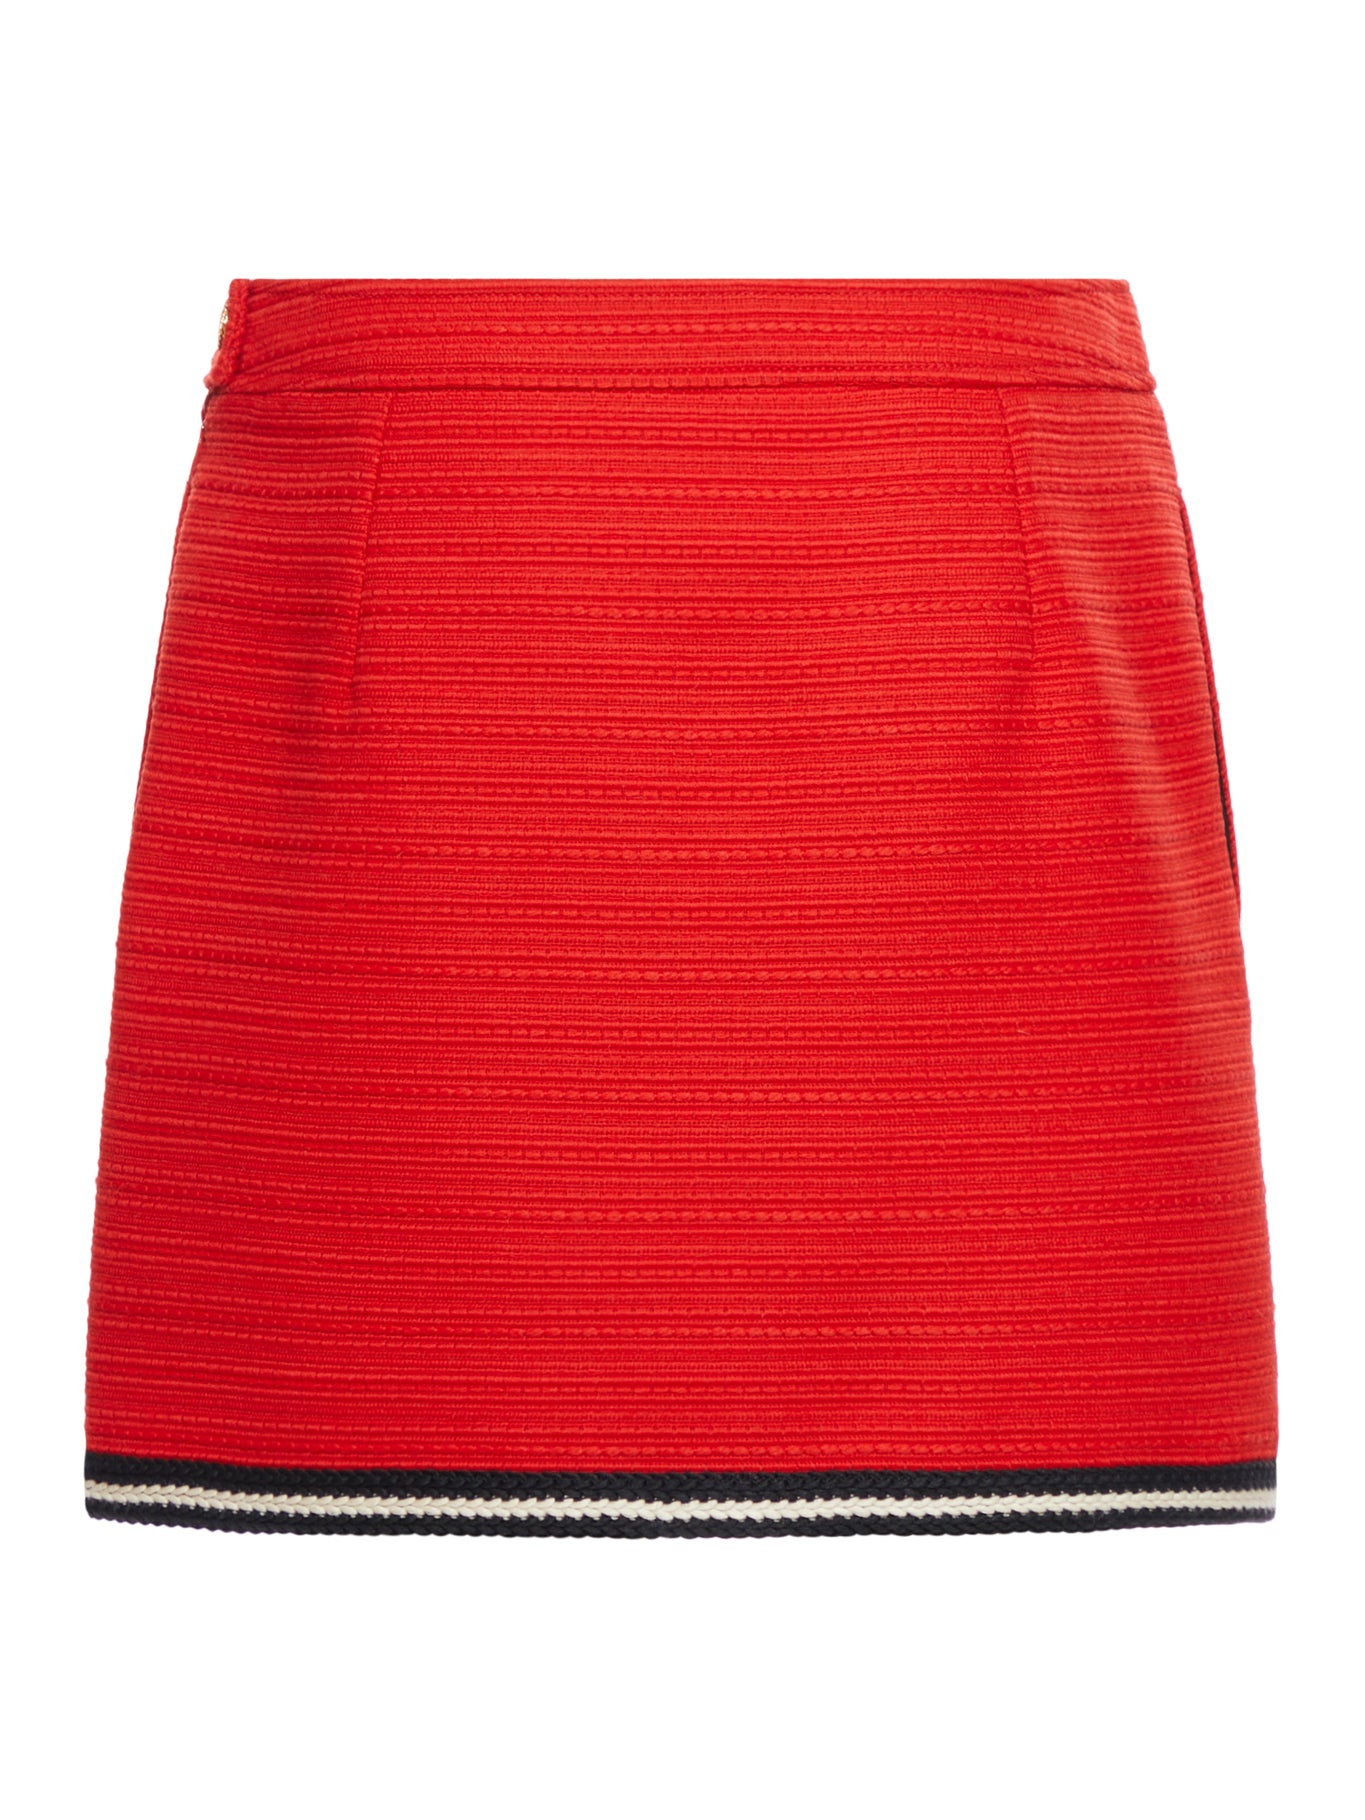 WOOL SKIRT WITH BRAIDED FINISHES